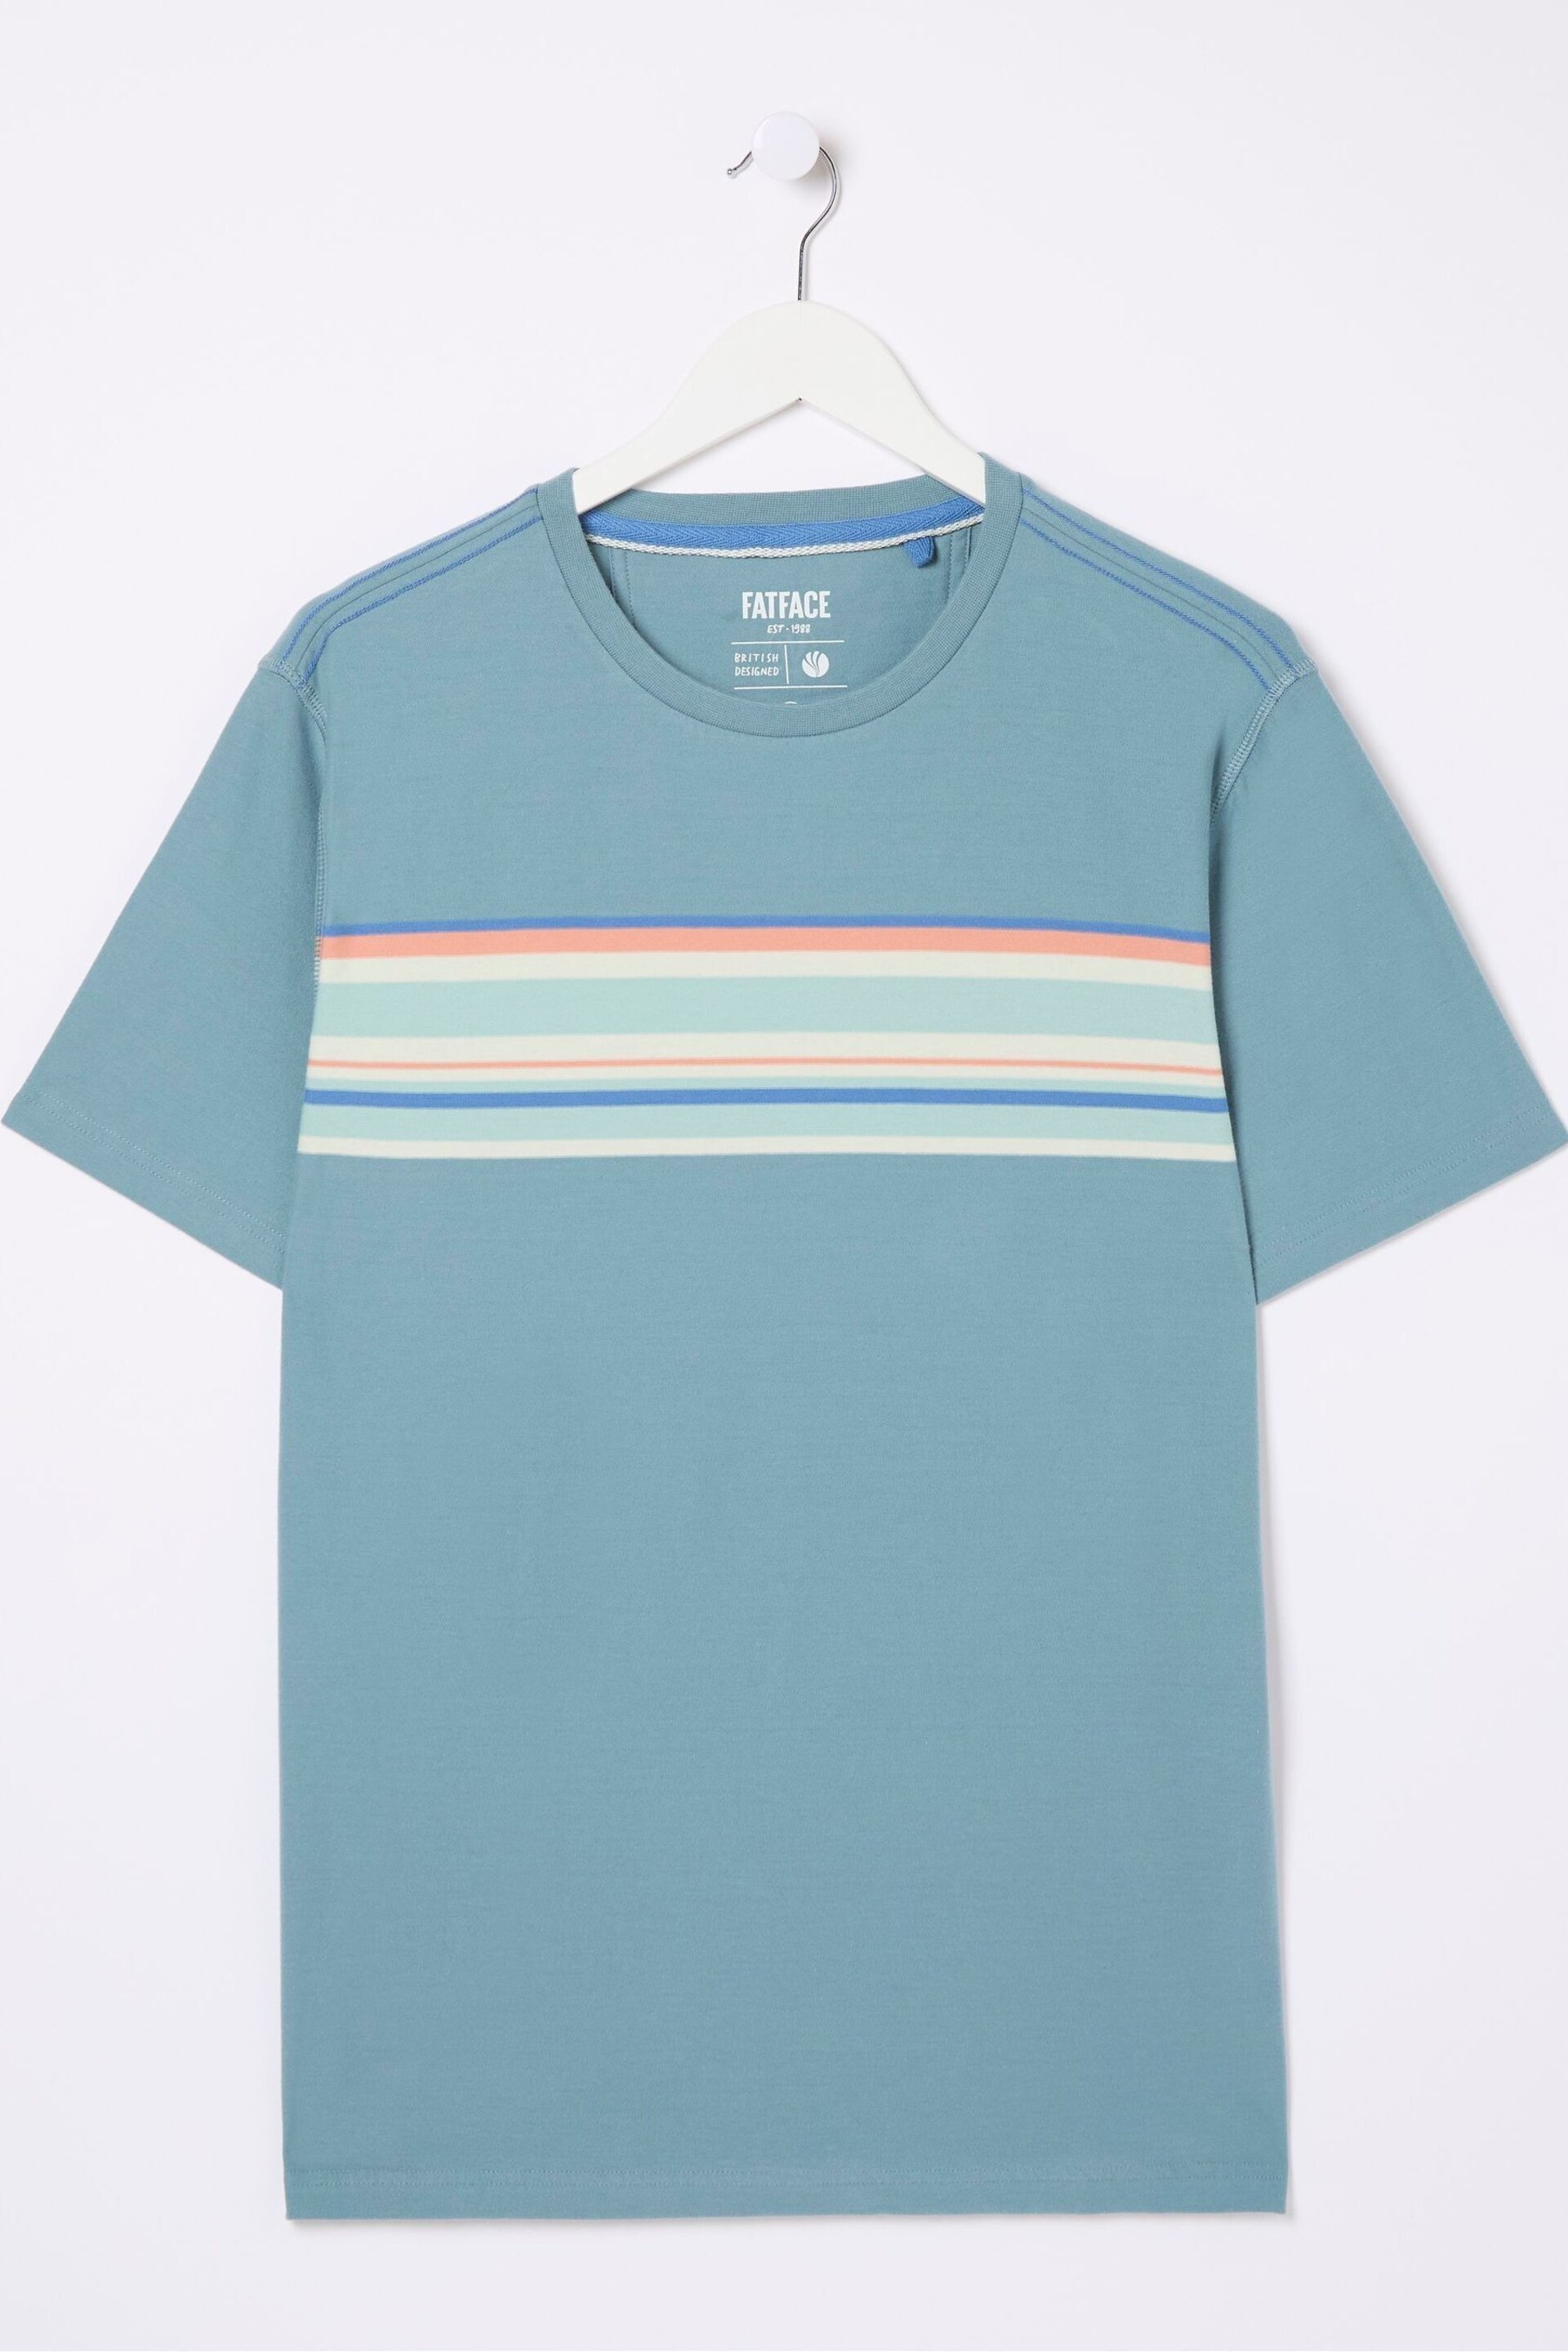 FatFace Blue Chest Stripe T-Shirt - Image 5 of 5